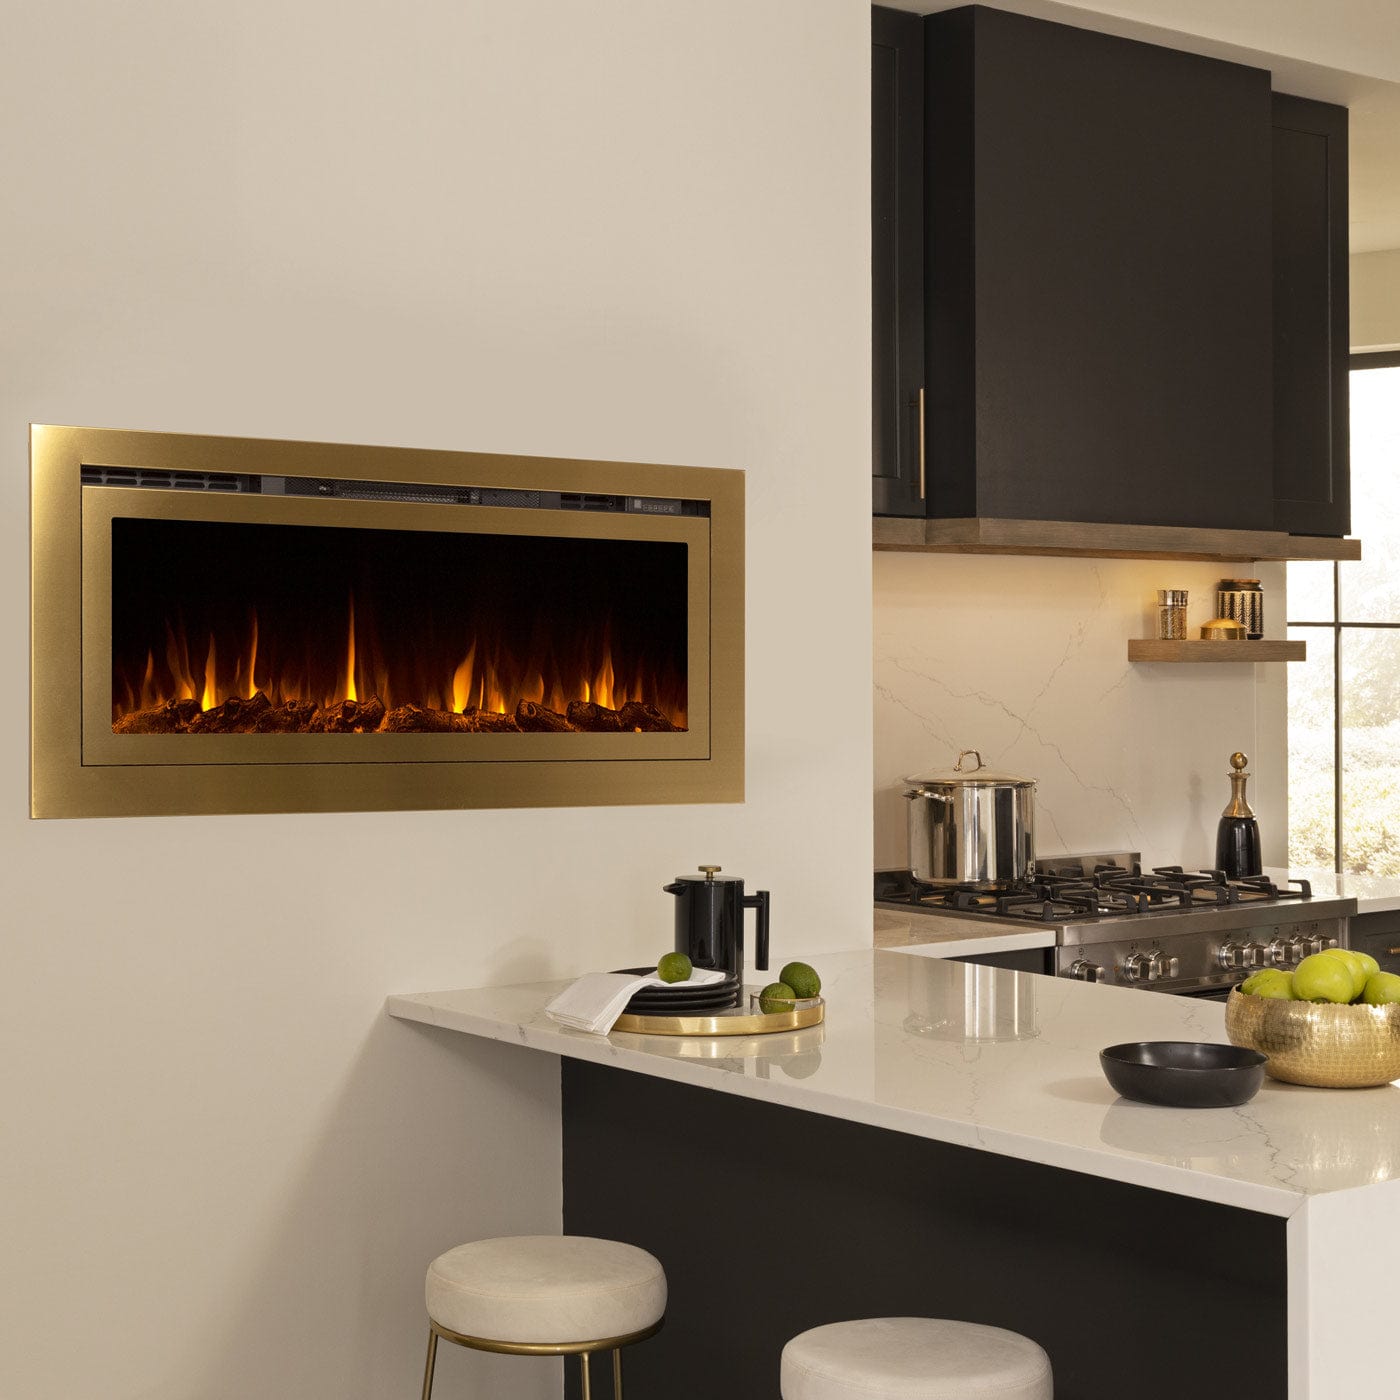 The Sideline Deluxe Gold 60 Inch 86276 Recessed Smart Electric Fireplace room view.